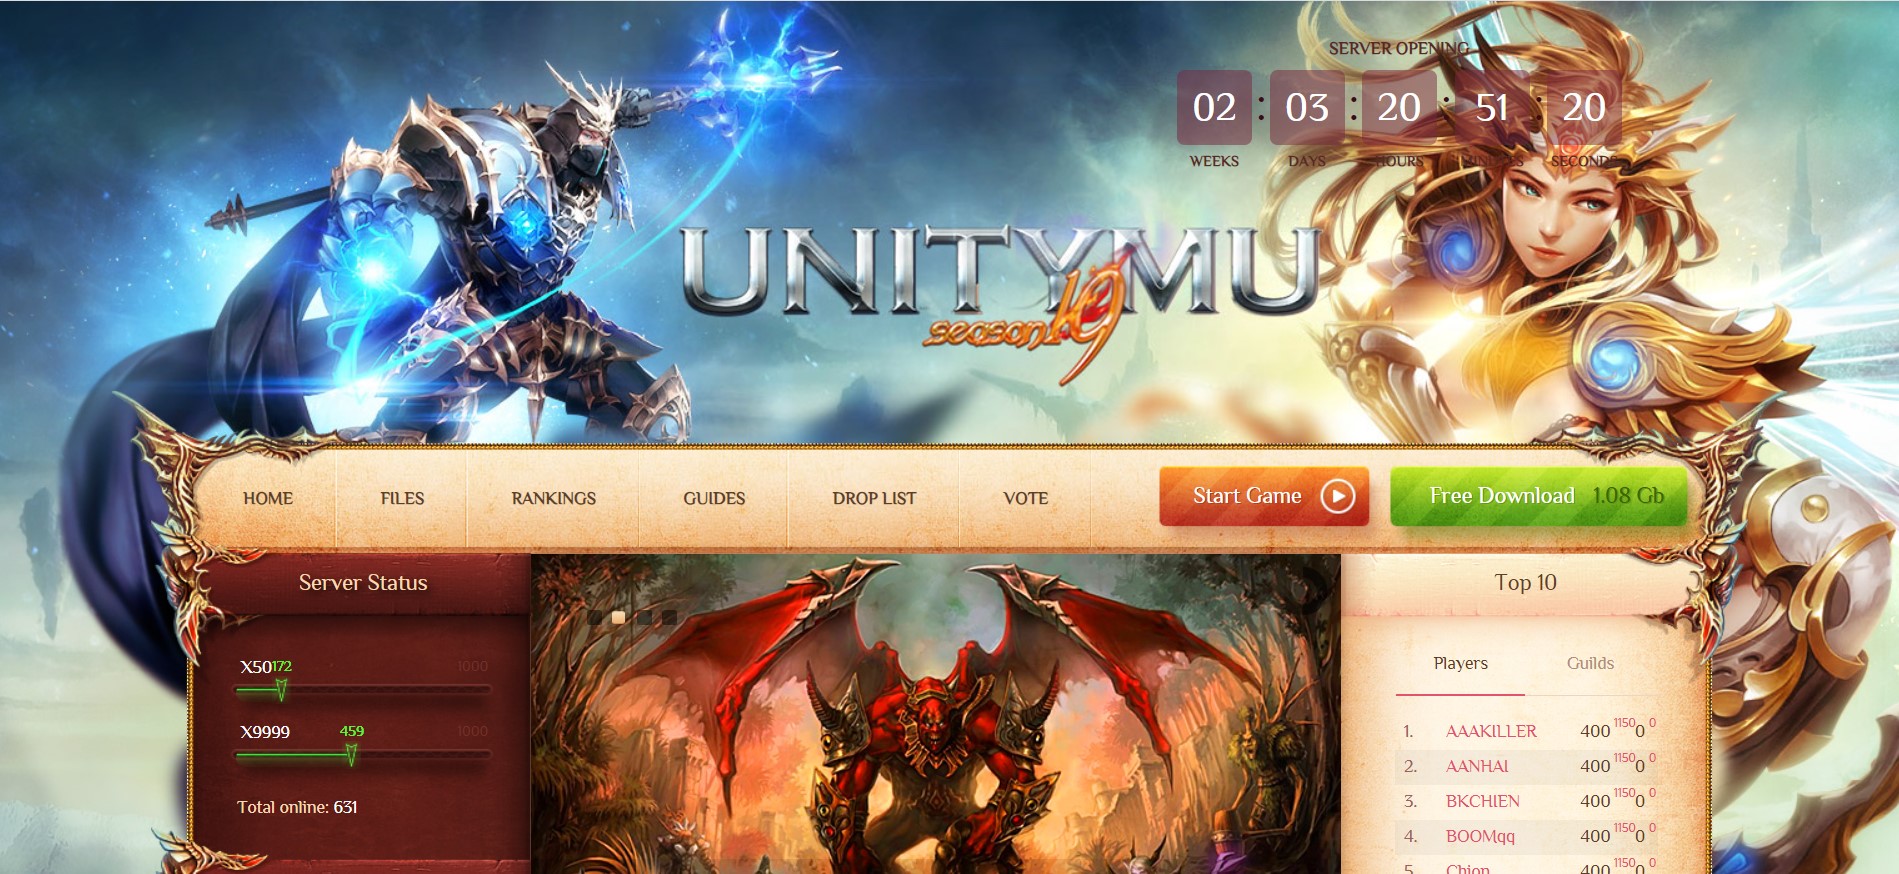 🌐 Unity in UnityMu: Showcase Your Power in Season 19 with Rates x500! ⚔️